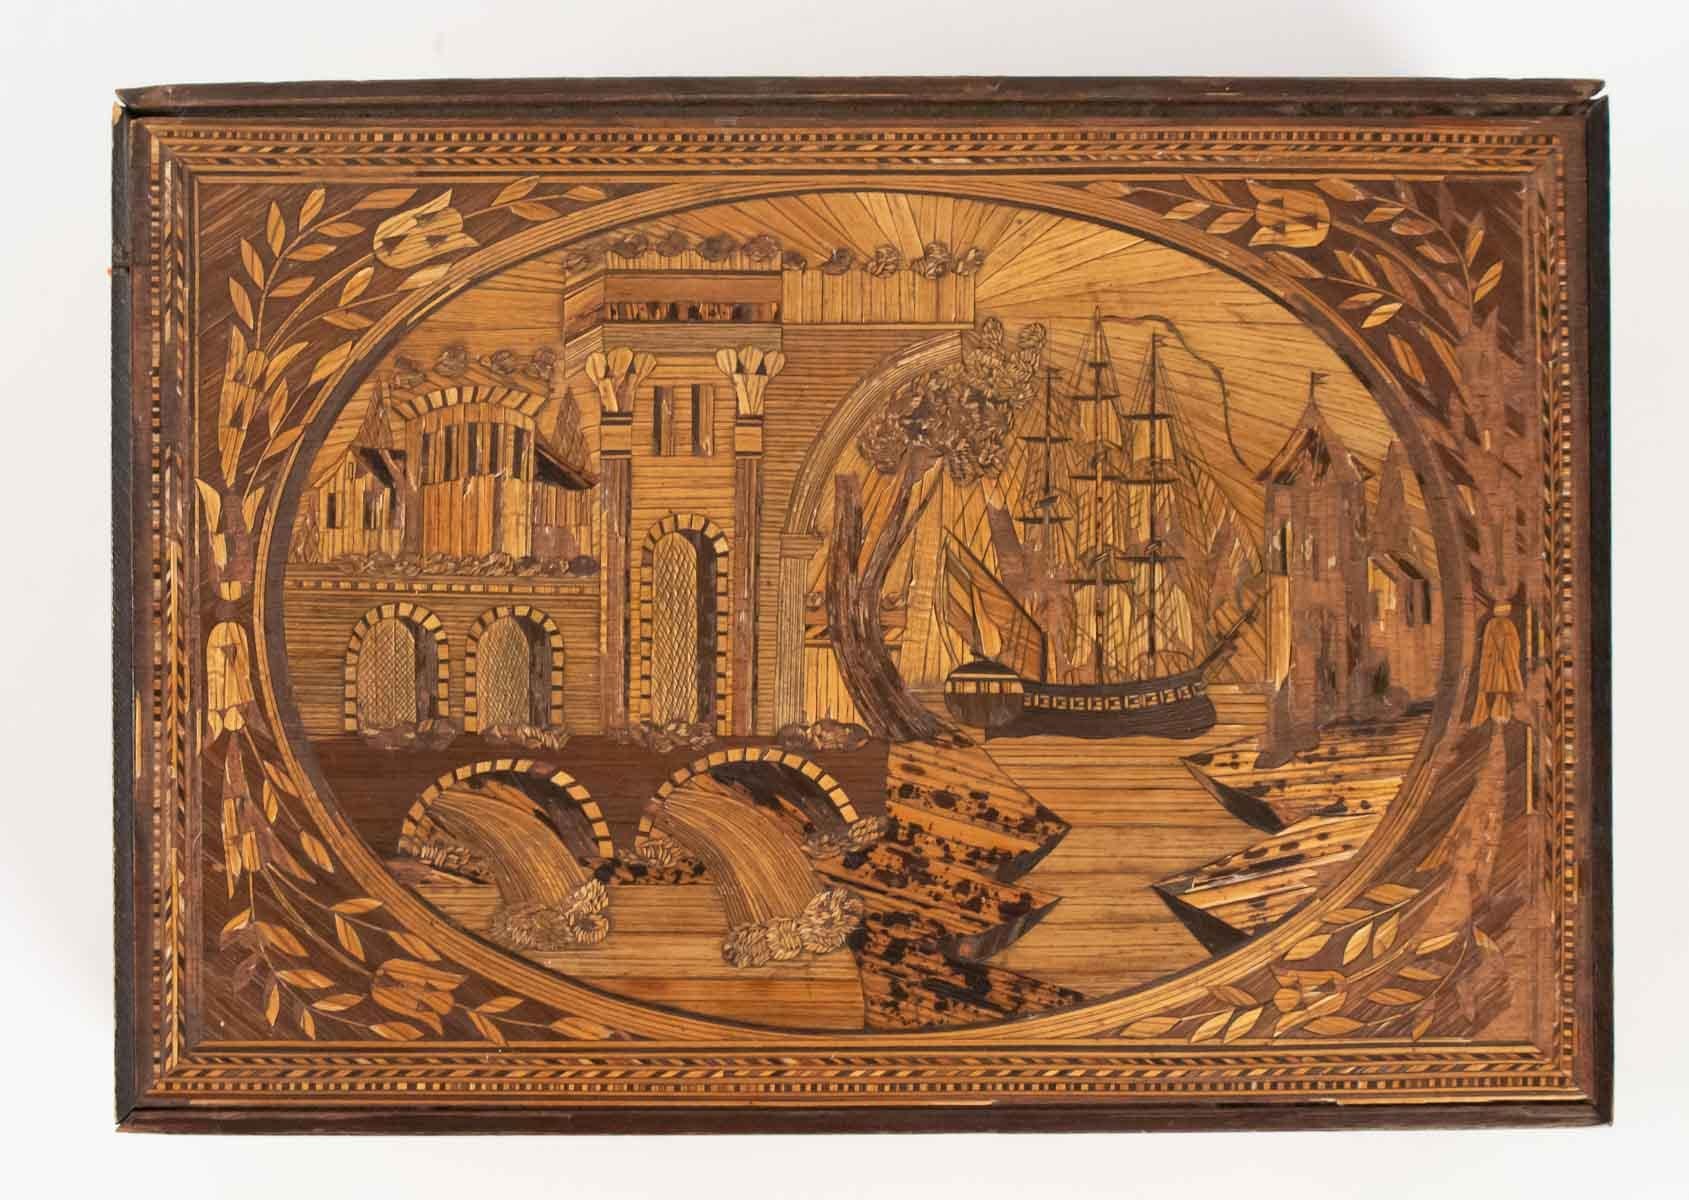 Straw Marquetry box, mid-19th century, antiquity, France, small accident and lack.
Measures: L 28cm, P 20cm, H 9cm.